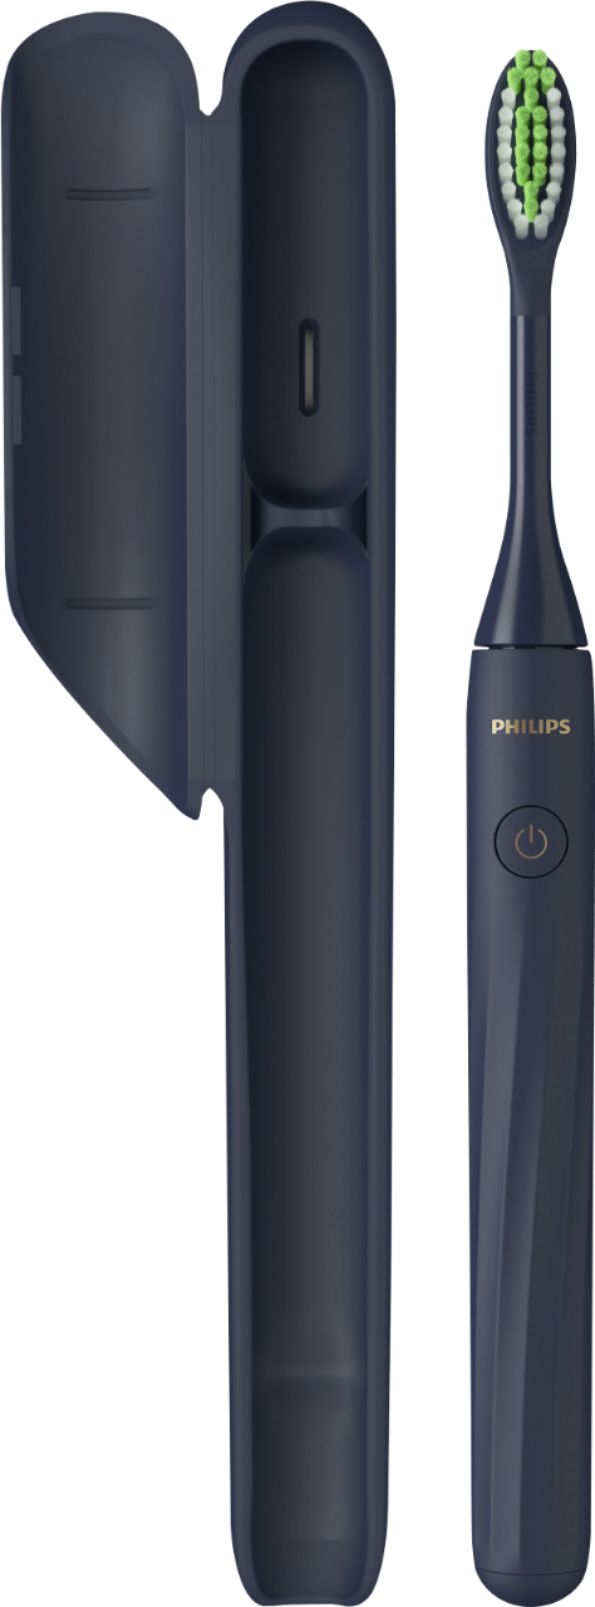 Angle View: Philips Sonicare - Philips One by Sonicare Battery Toothbrush - Midnight Navy Blue